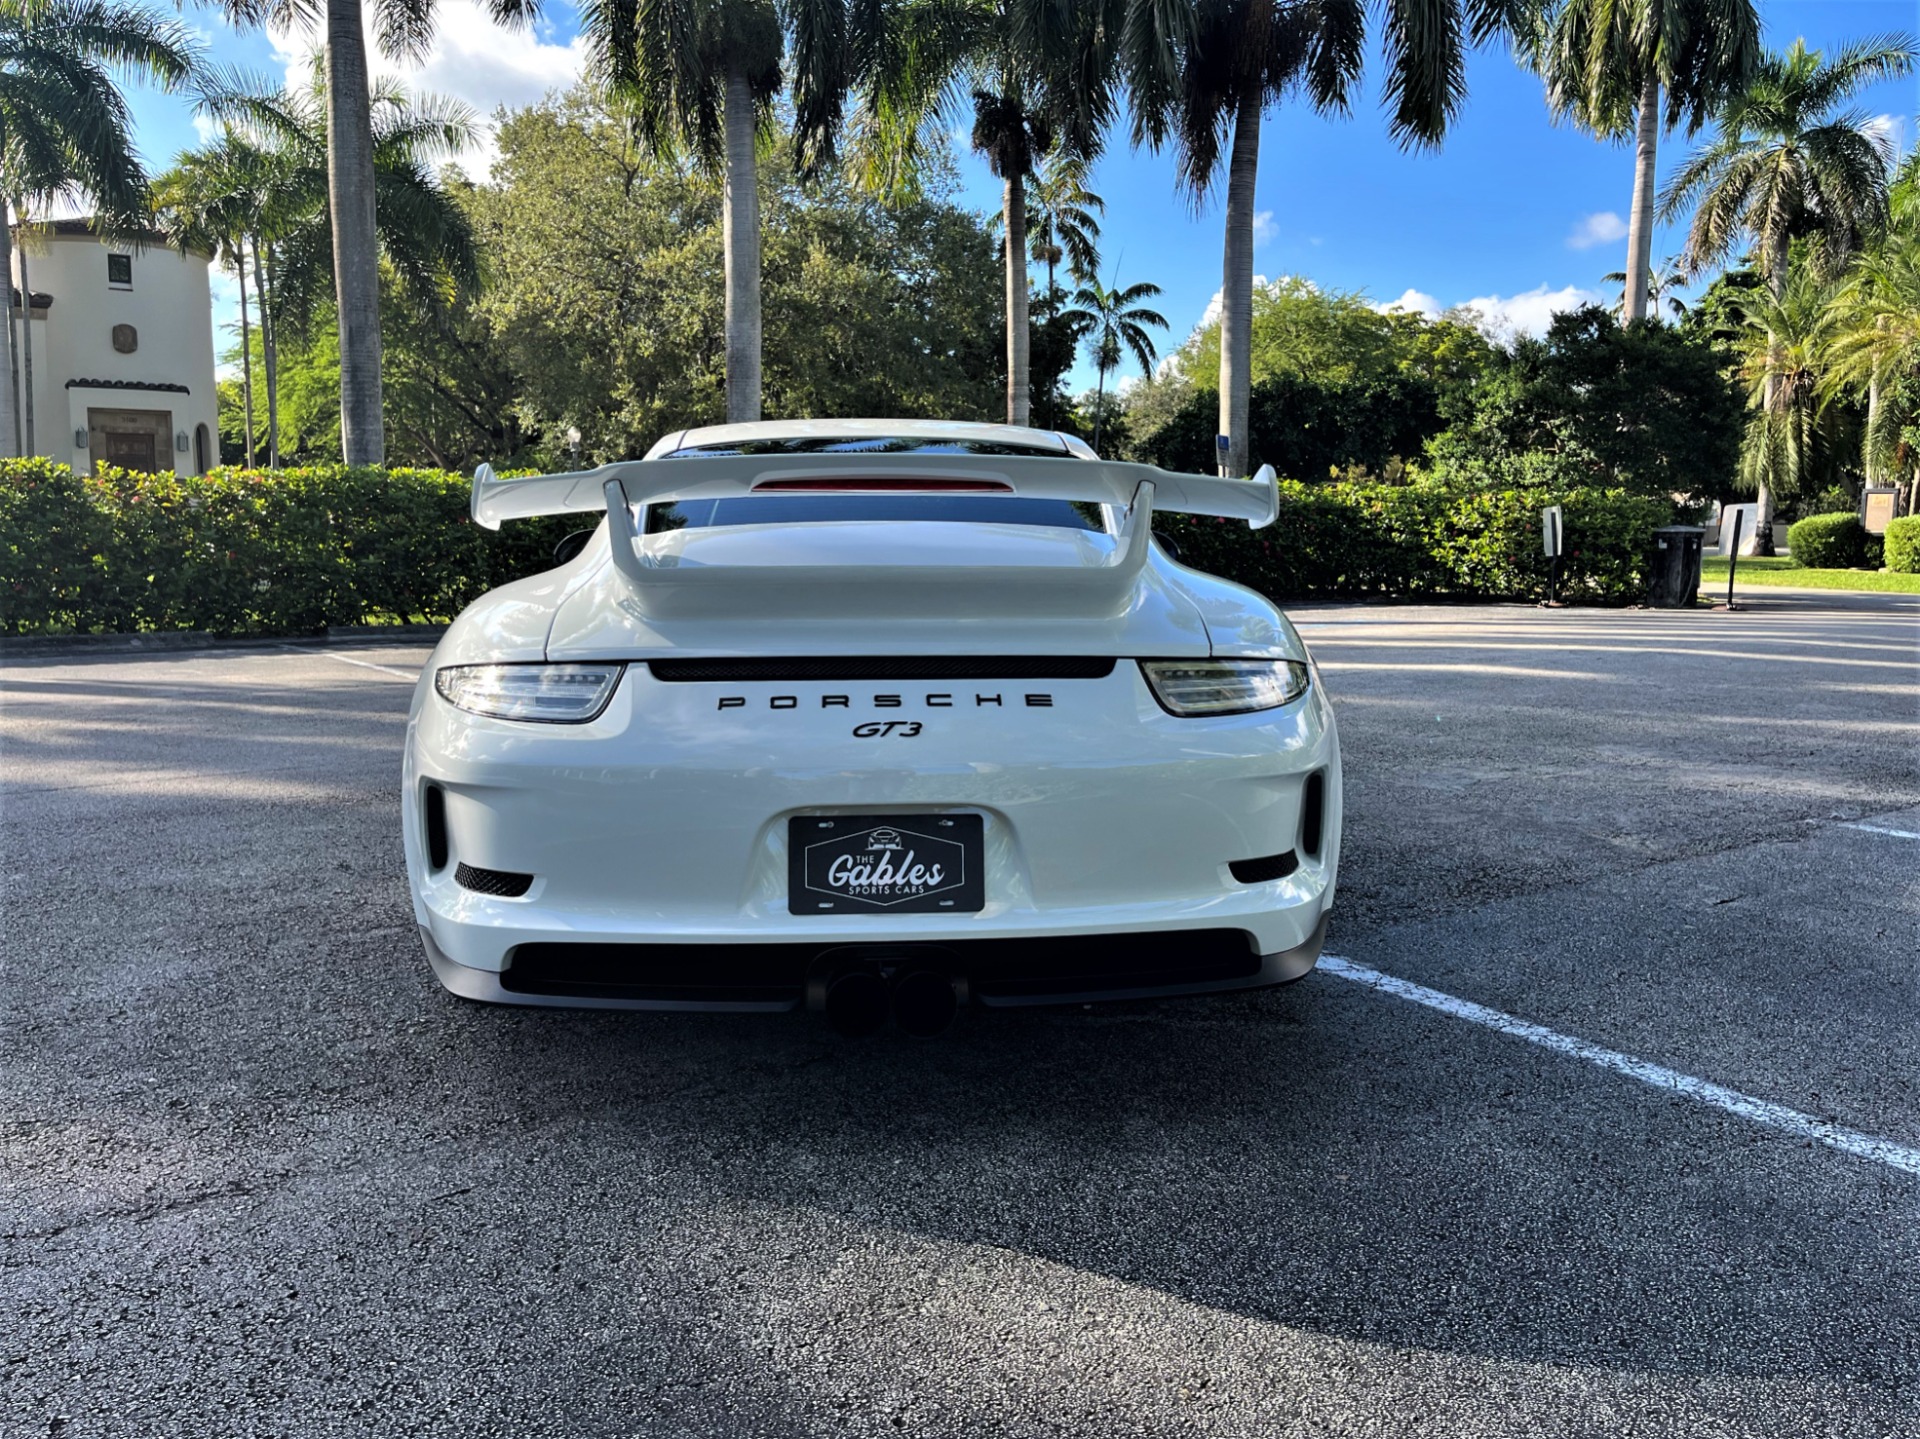 Used 2014 Porsche 911 GT3 for sale $142,850 at The Gables Sports Cars in Miami FL 33146 4